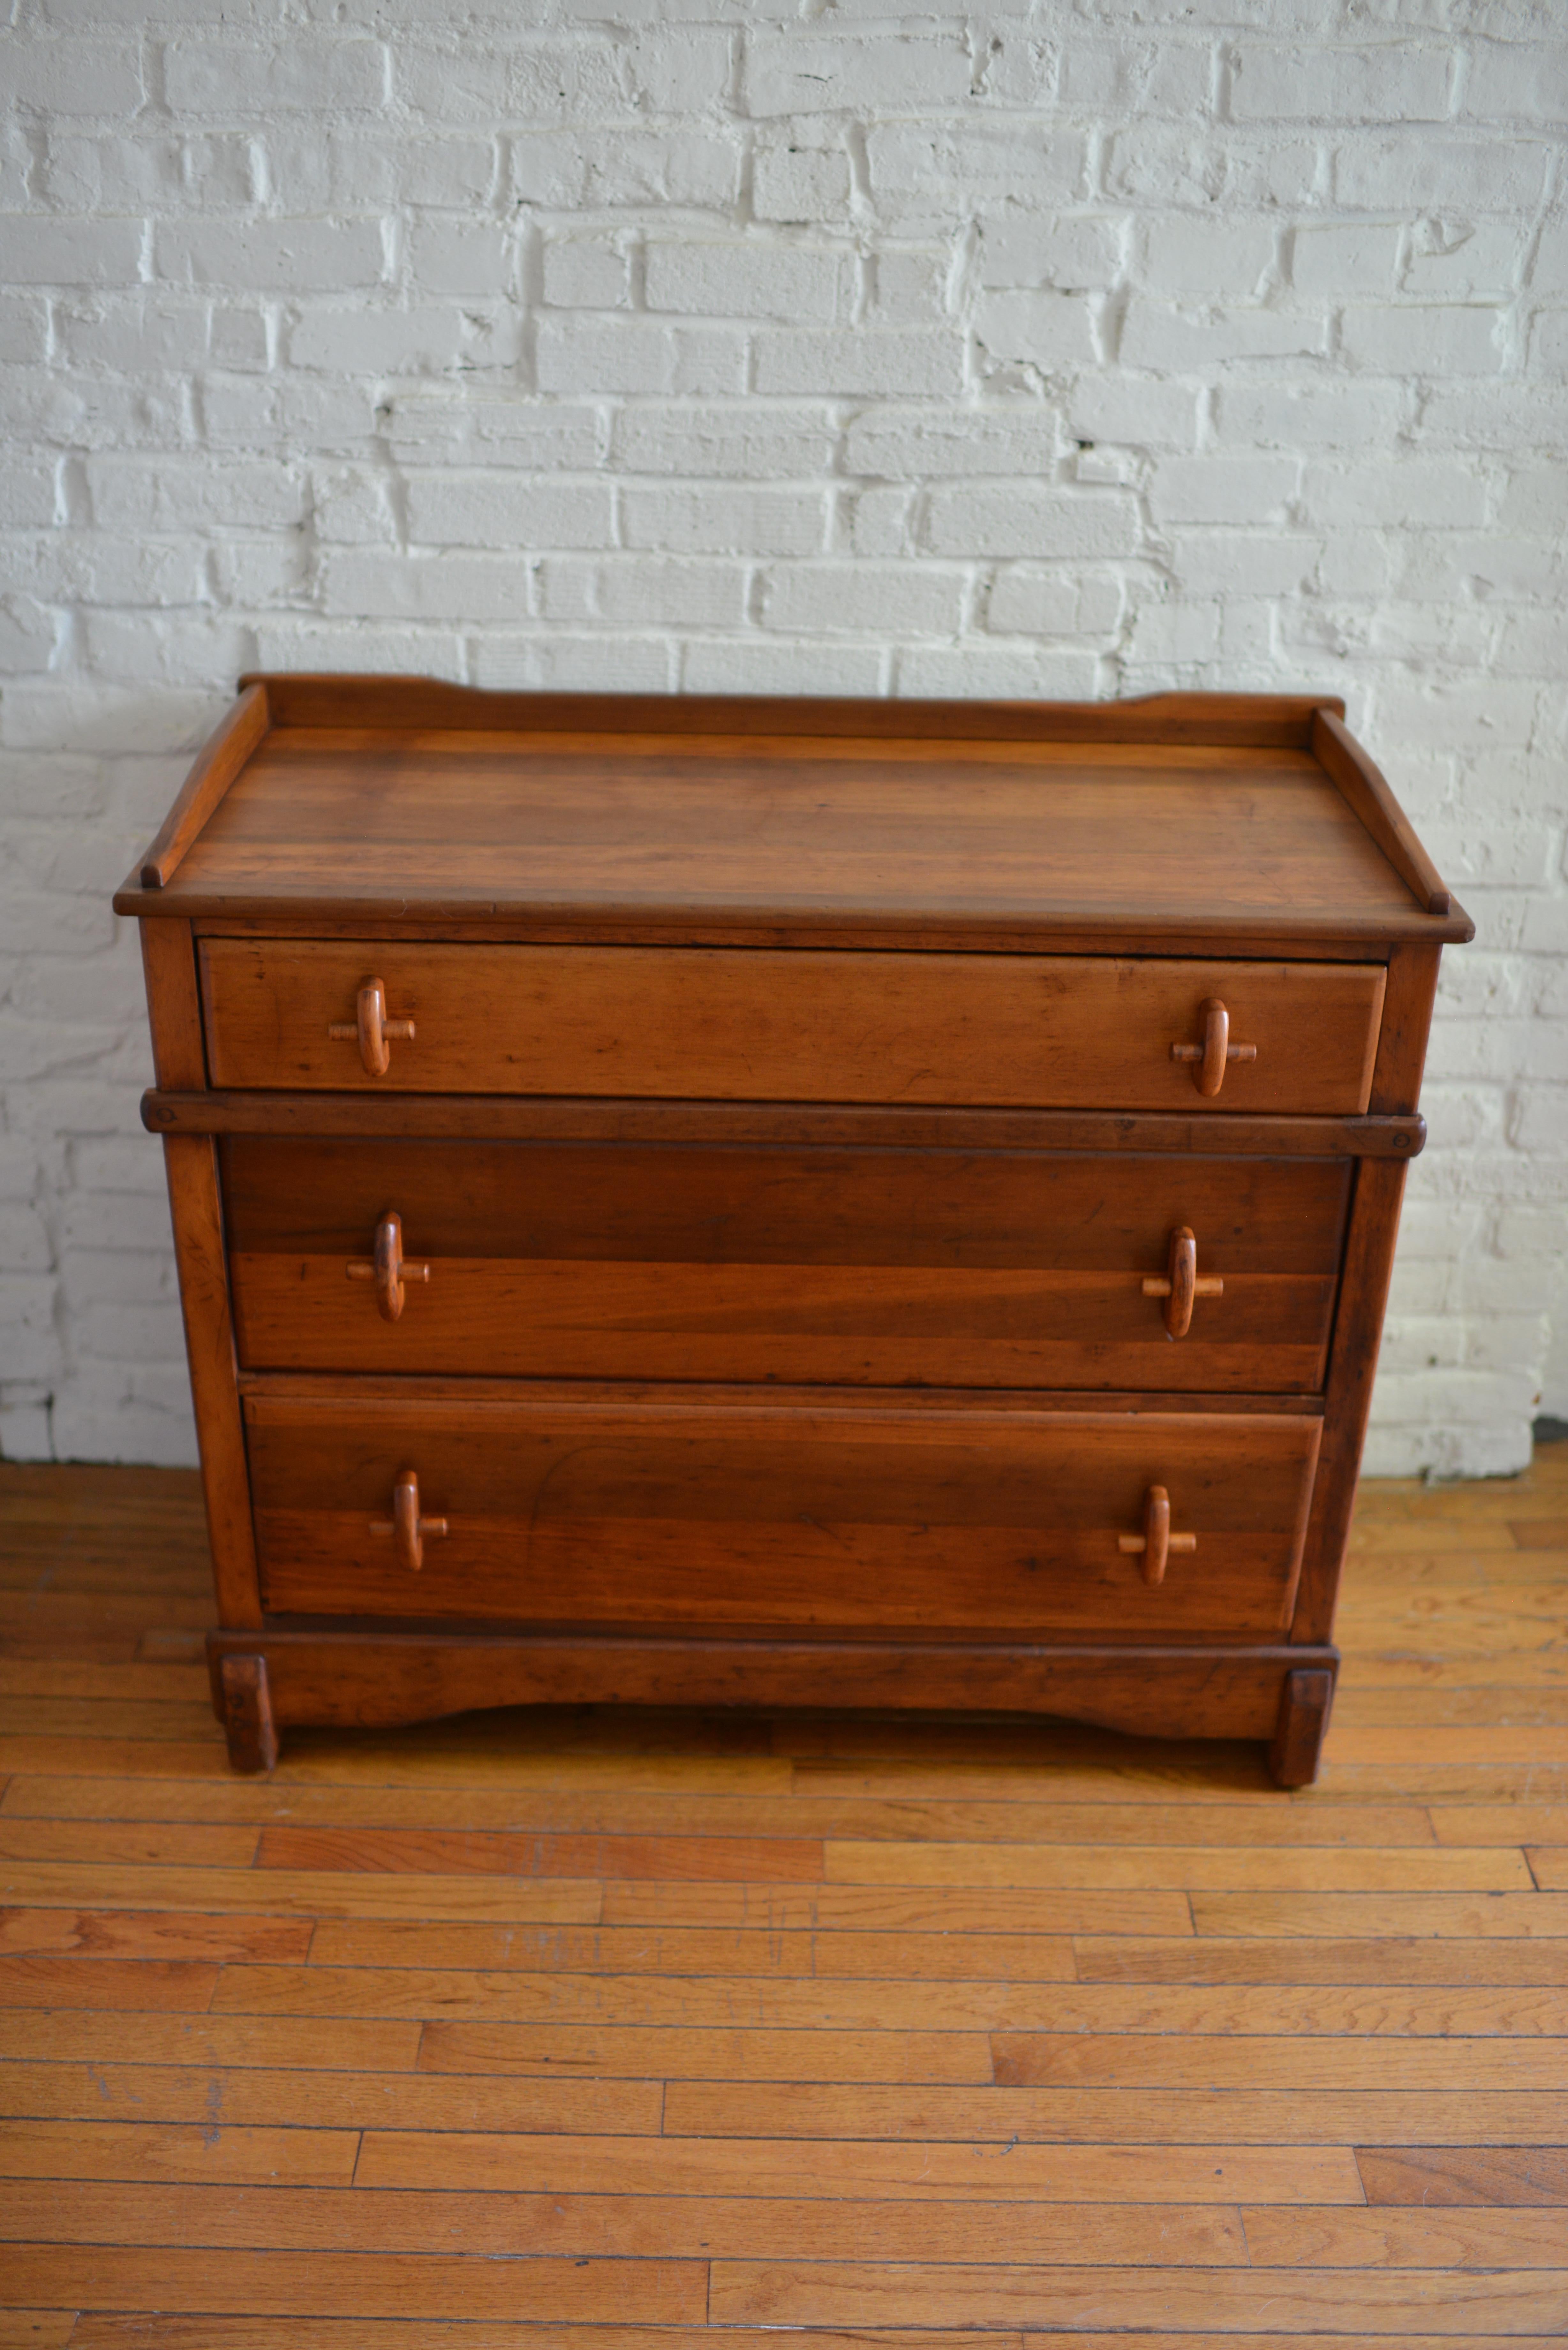 North American Antique Chest of Drawers with Cross Handle Pulls